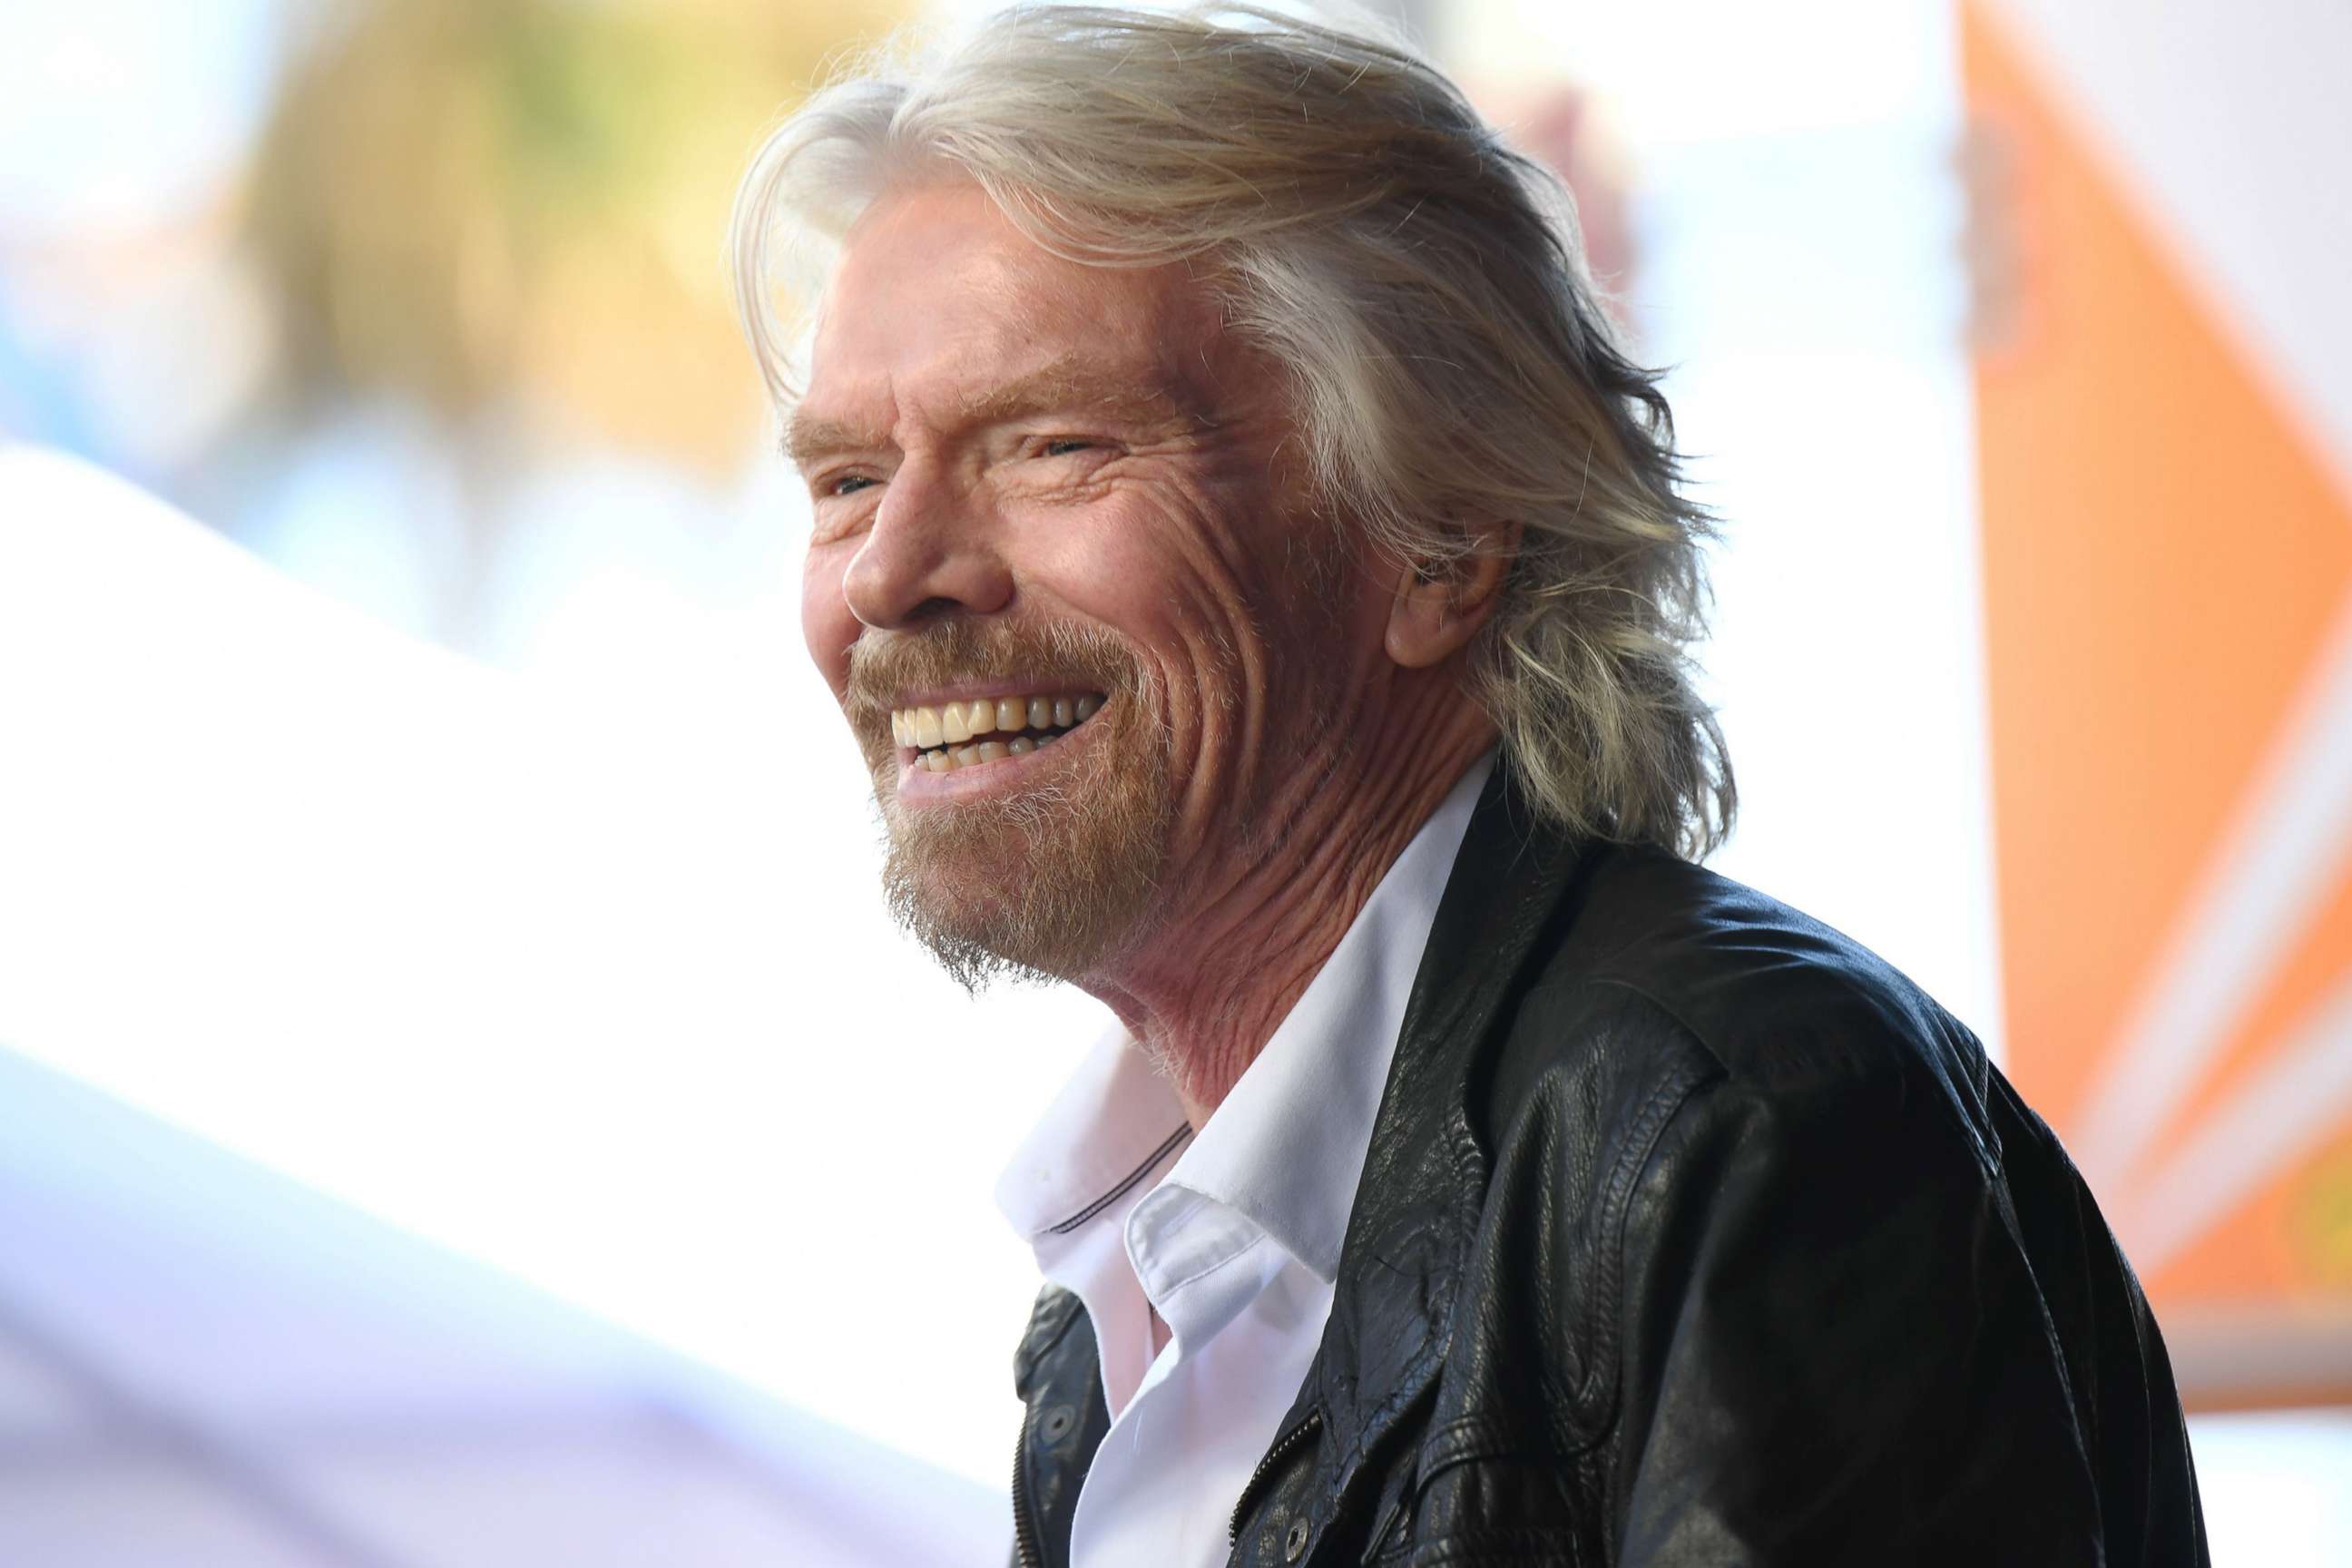 PHOTO: Sir Richard Branson attends his Hollywood Walk of Fame star unveiling ceremony in Hollywood, Calif., Oct. 16, 2018.